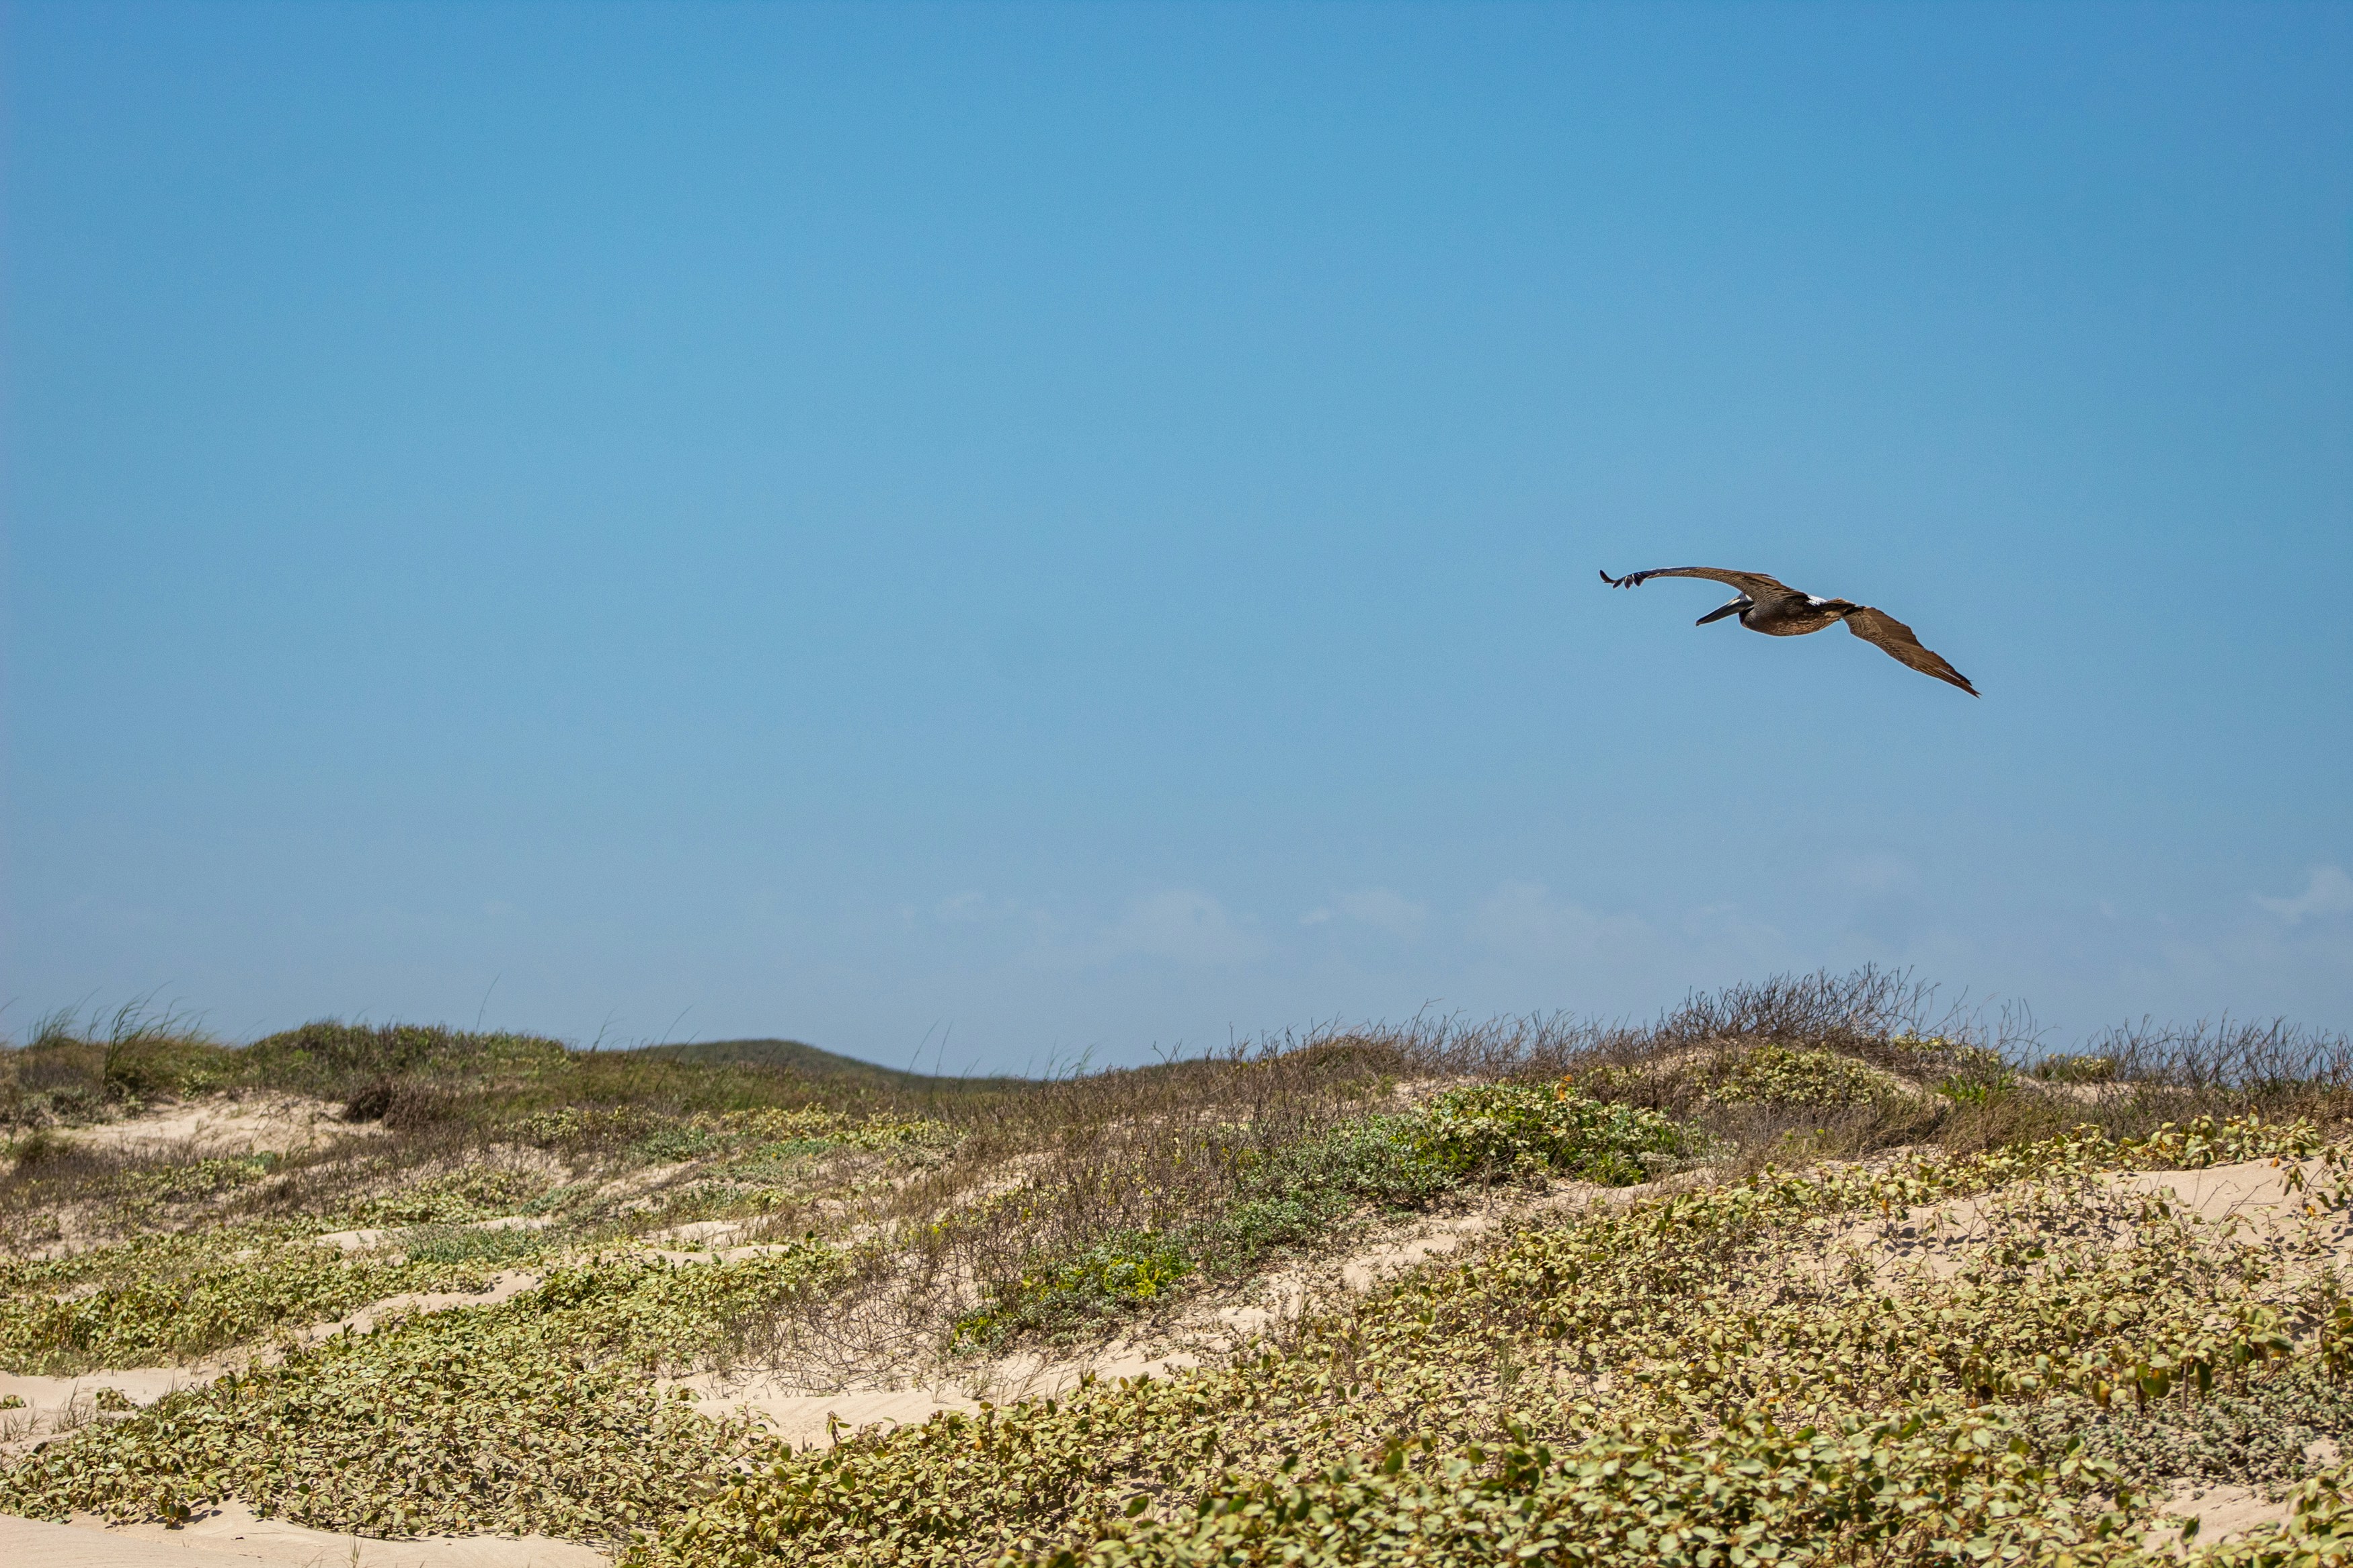 A brown pelican soars over the dunes at the Padre Island National Seashore.